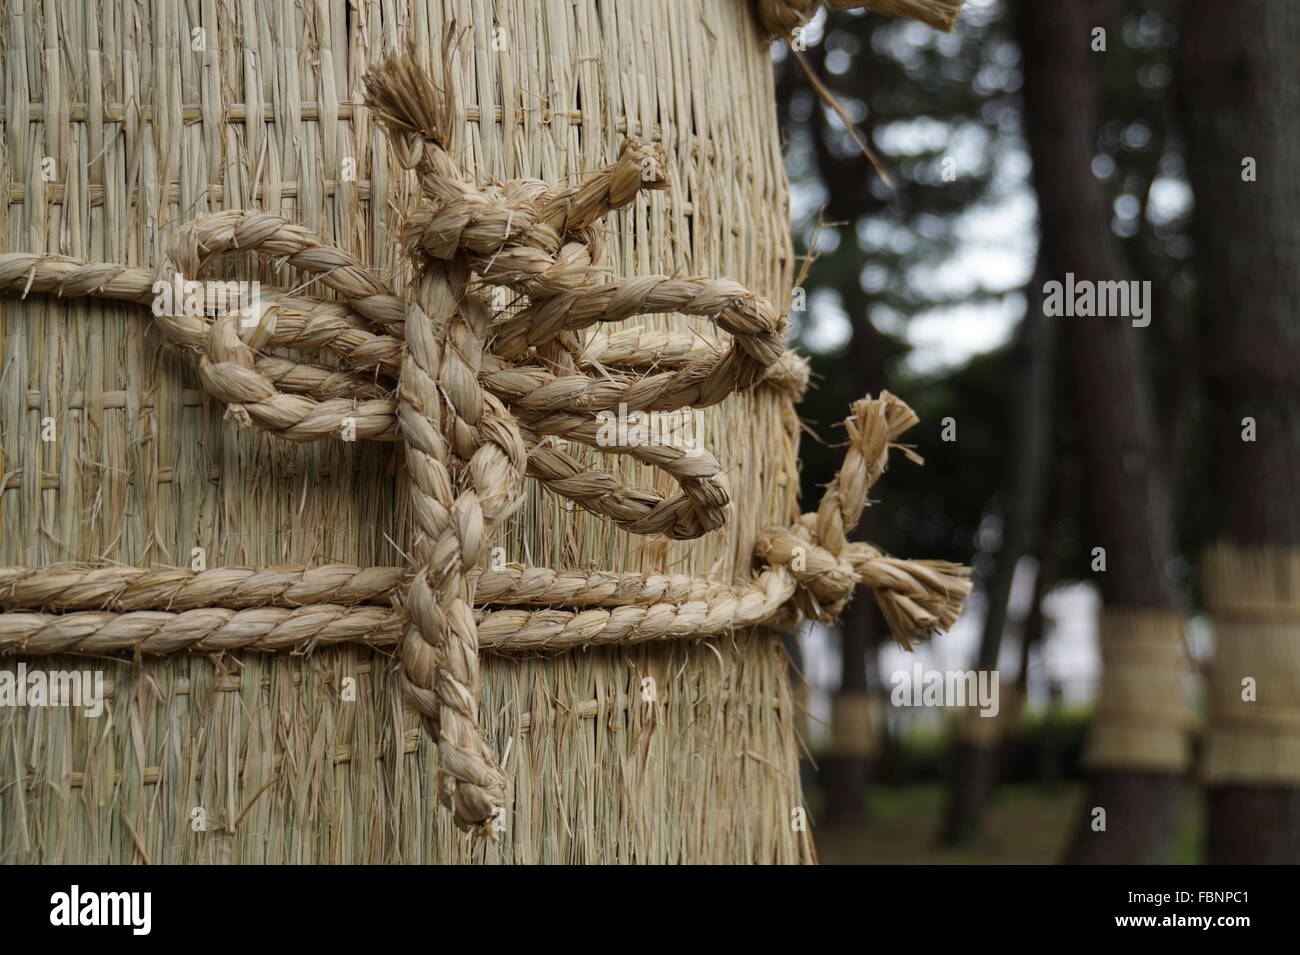 Straw Mat Wrapped Around Trees In Winter Stock Photo